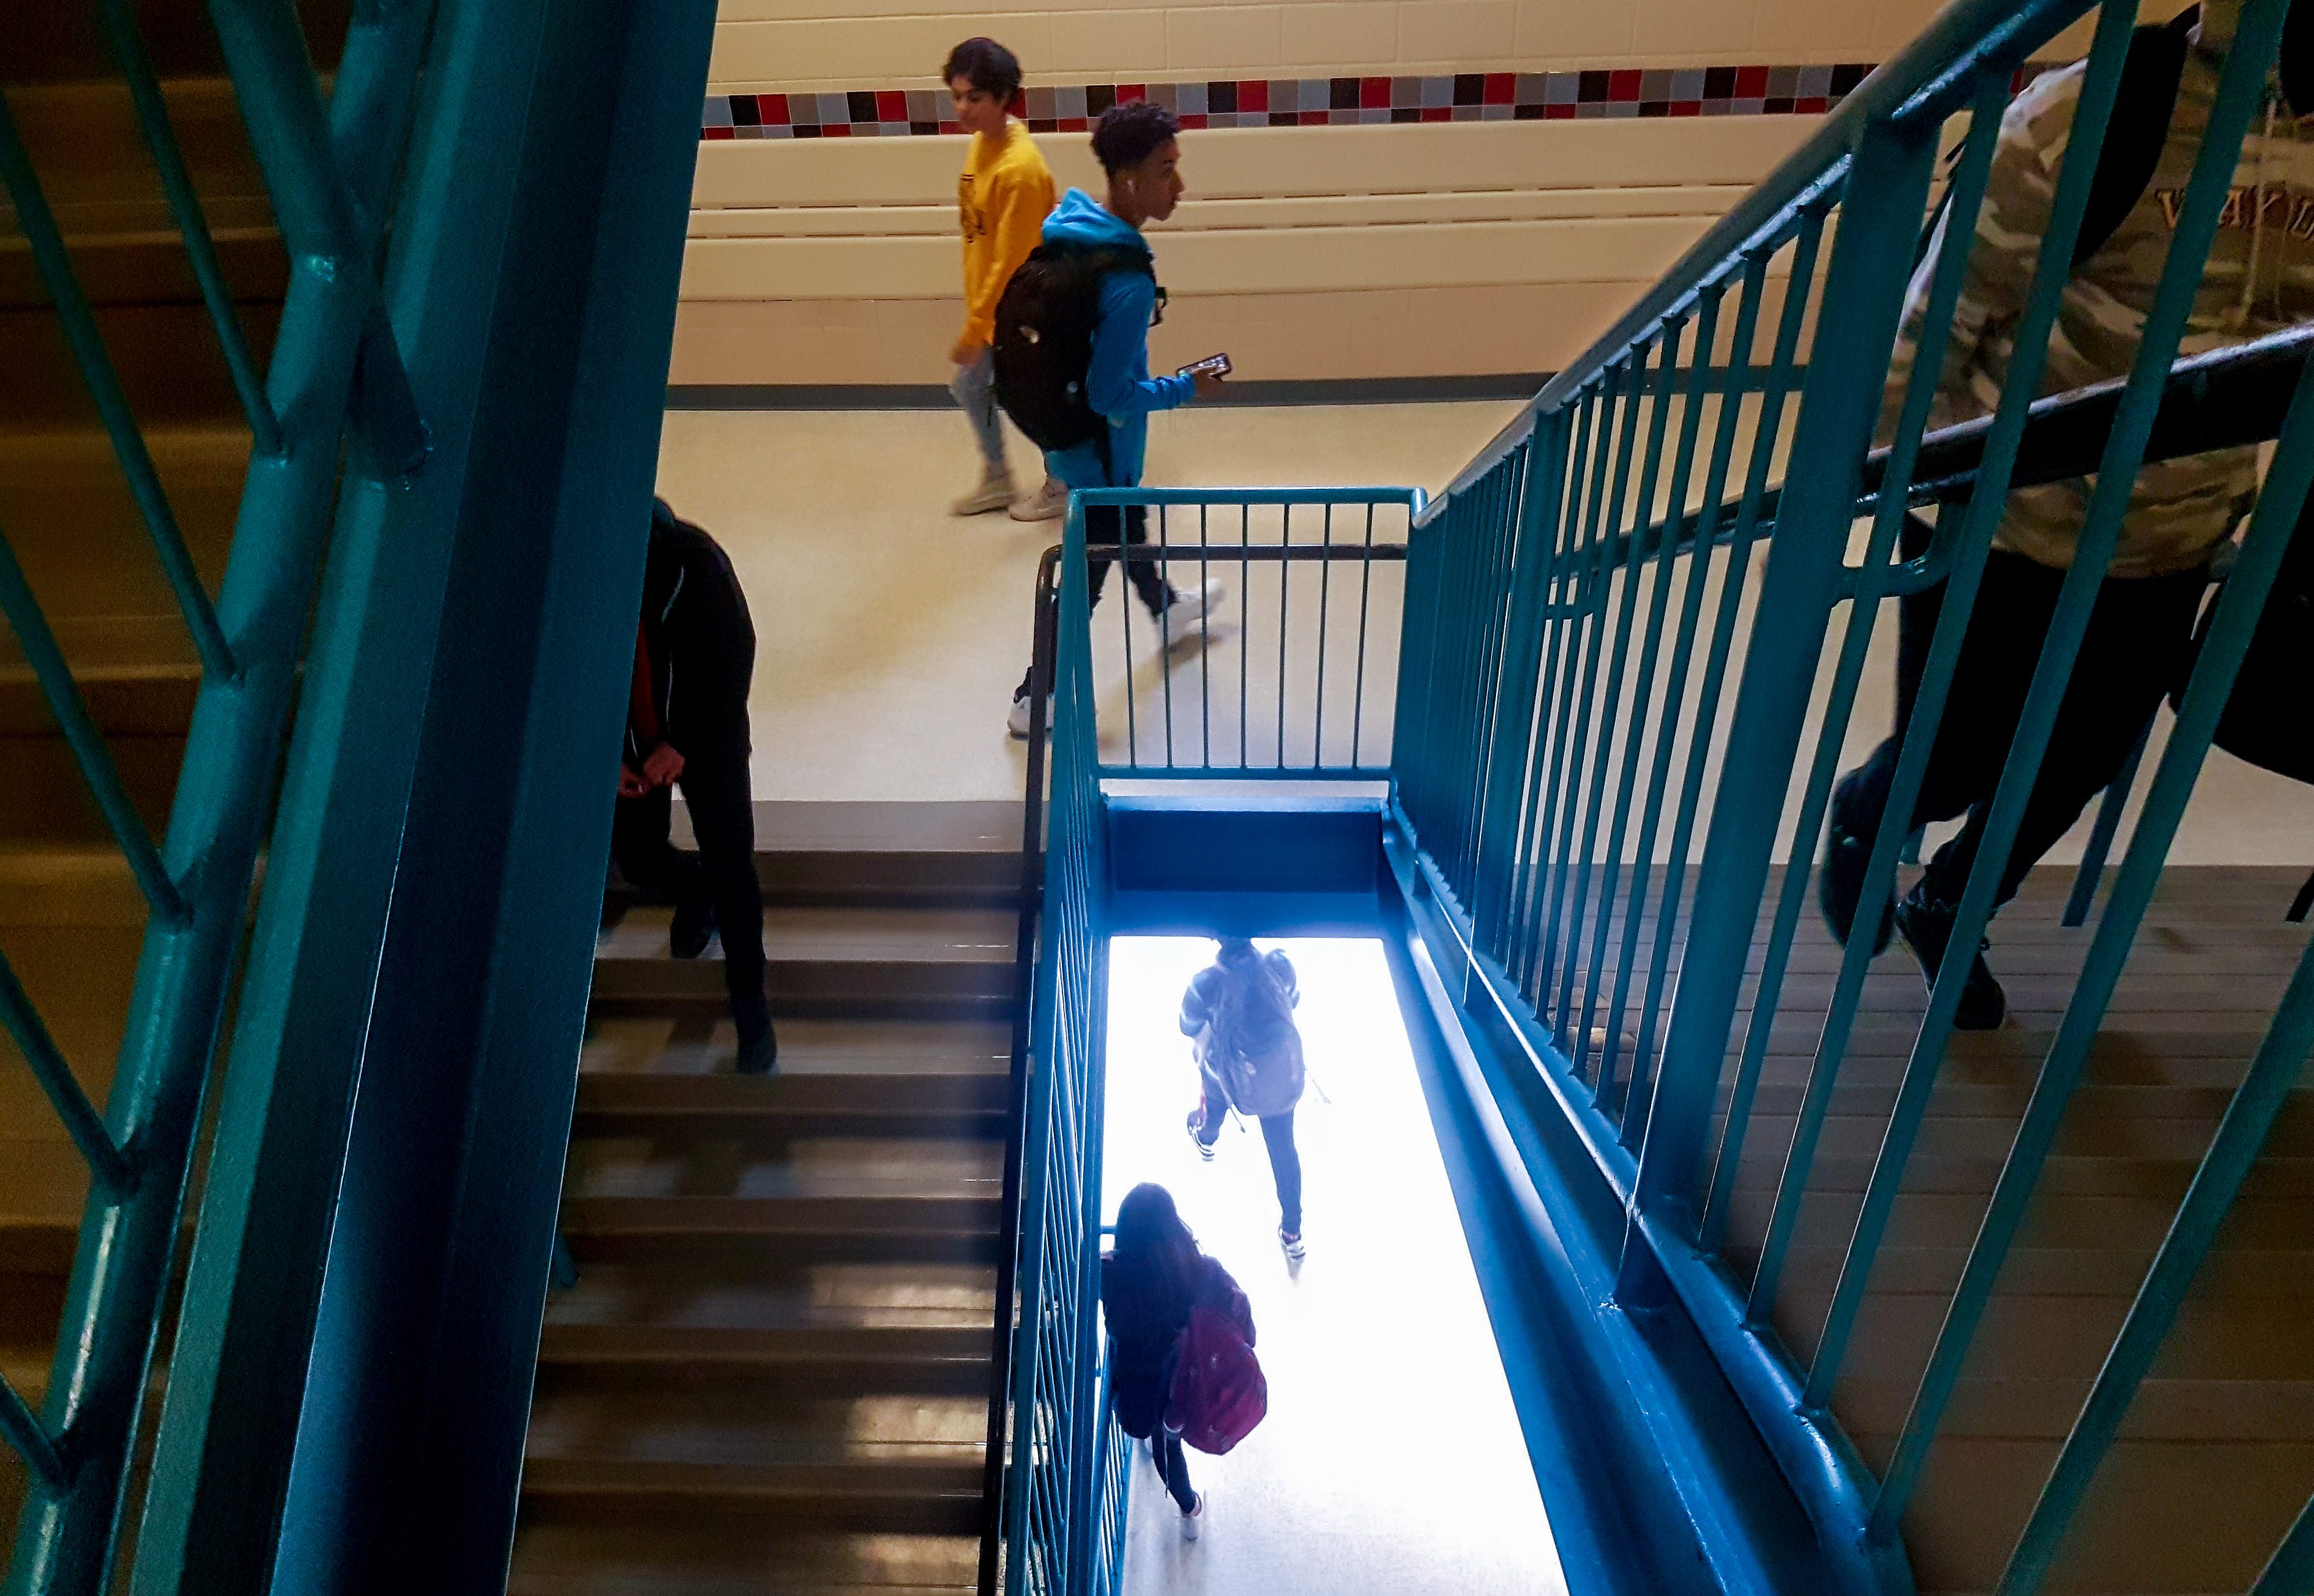 TC Williams stairwell with students